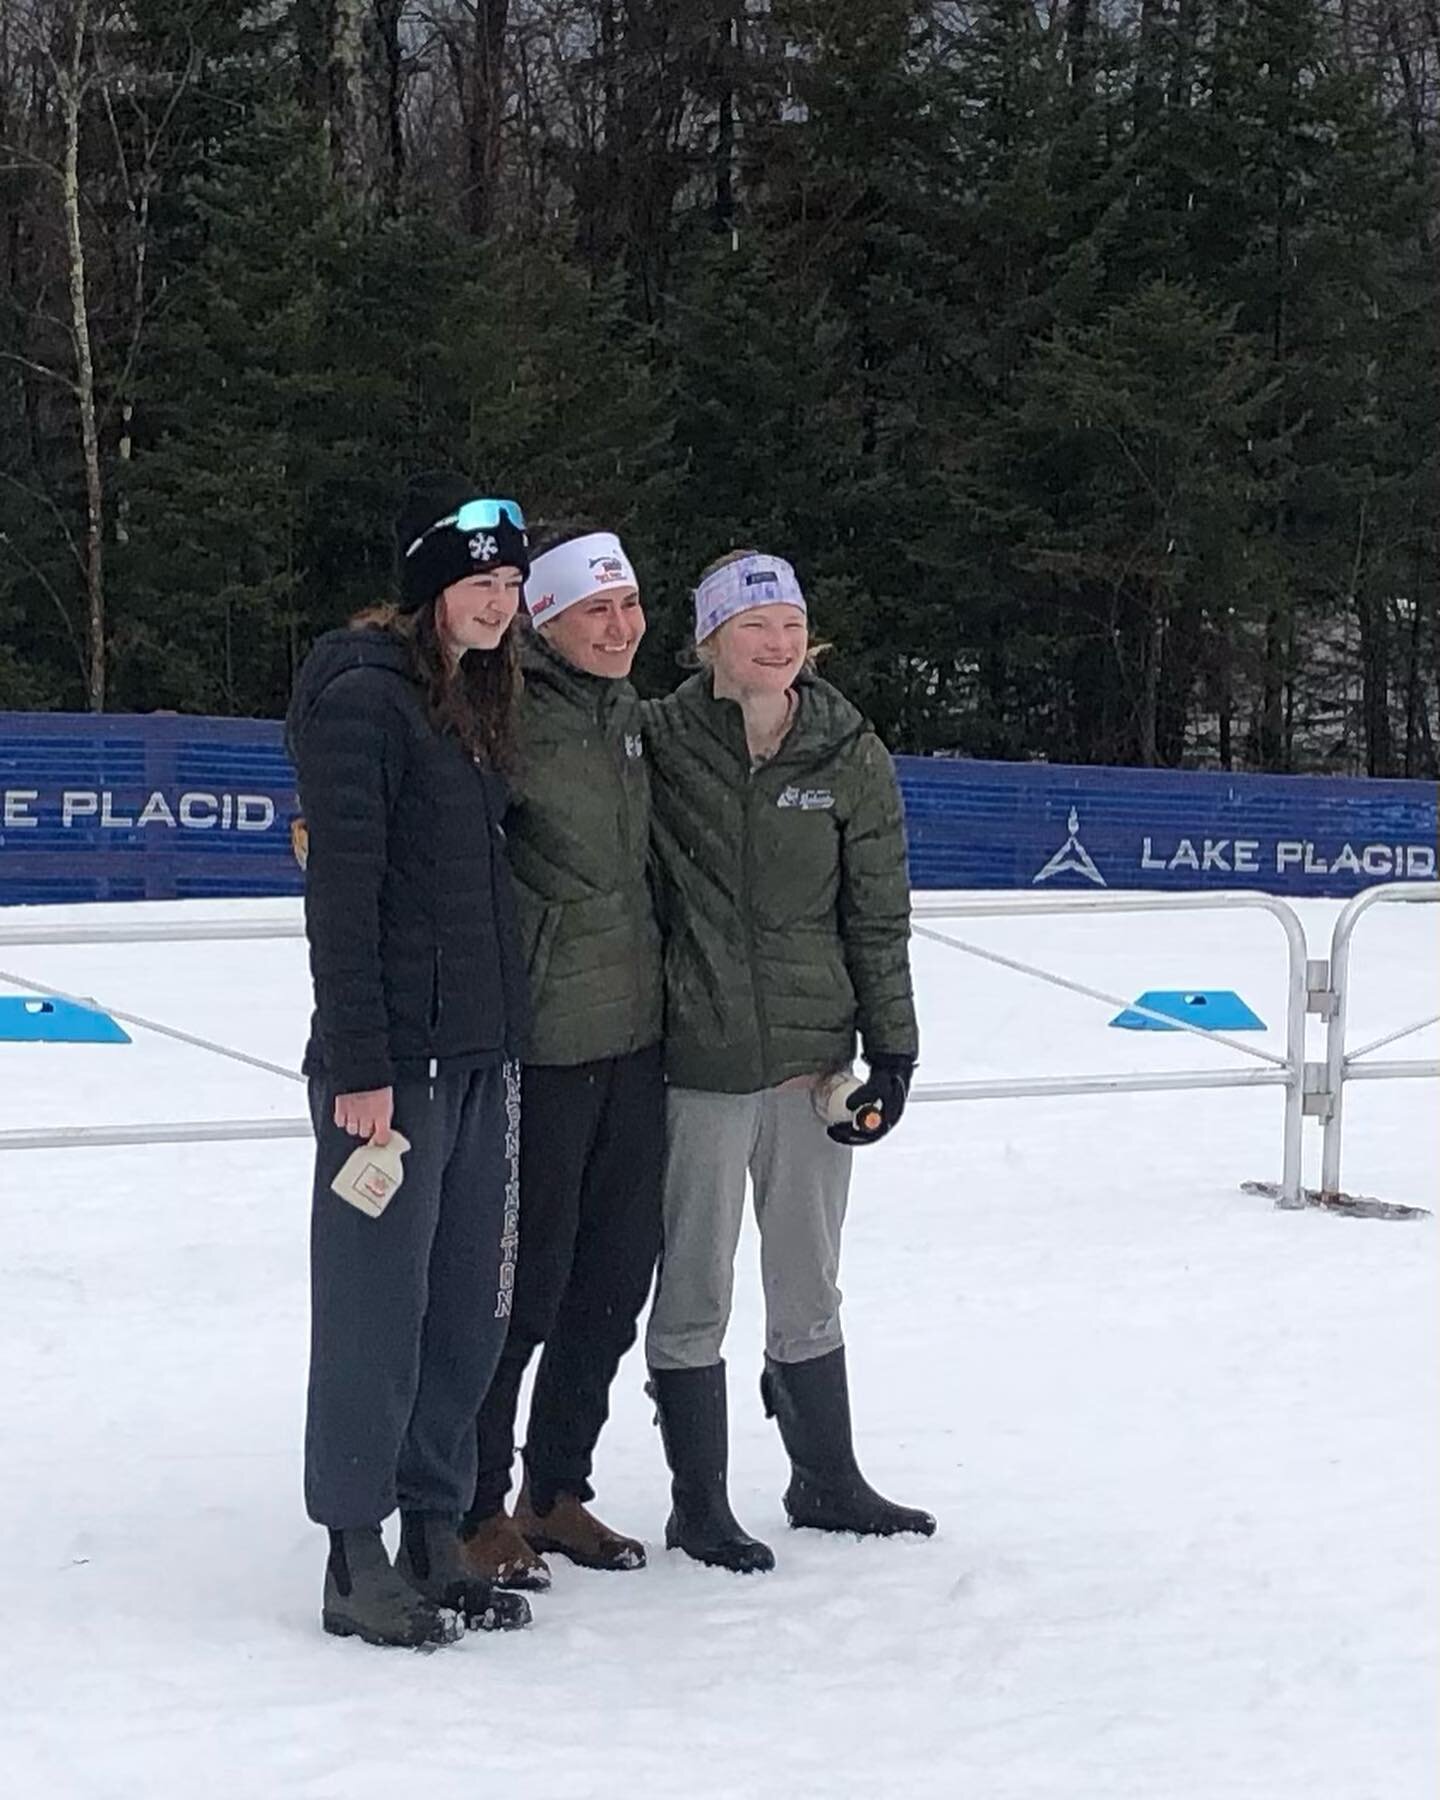 Great start to the #USCSA season for @aokj22!
So fun to be in Lake Placid to watch her ski.
Despite having wisdom tooth surgery 10 days before she had good results finishing 5th in the 5k classic and a brilliant 2nd in the 10k skate mass start.
So ha